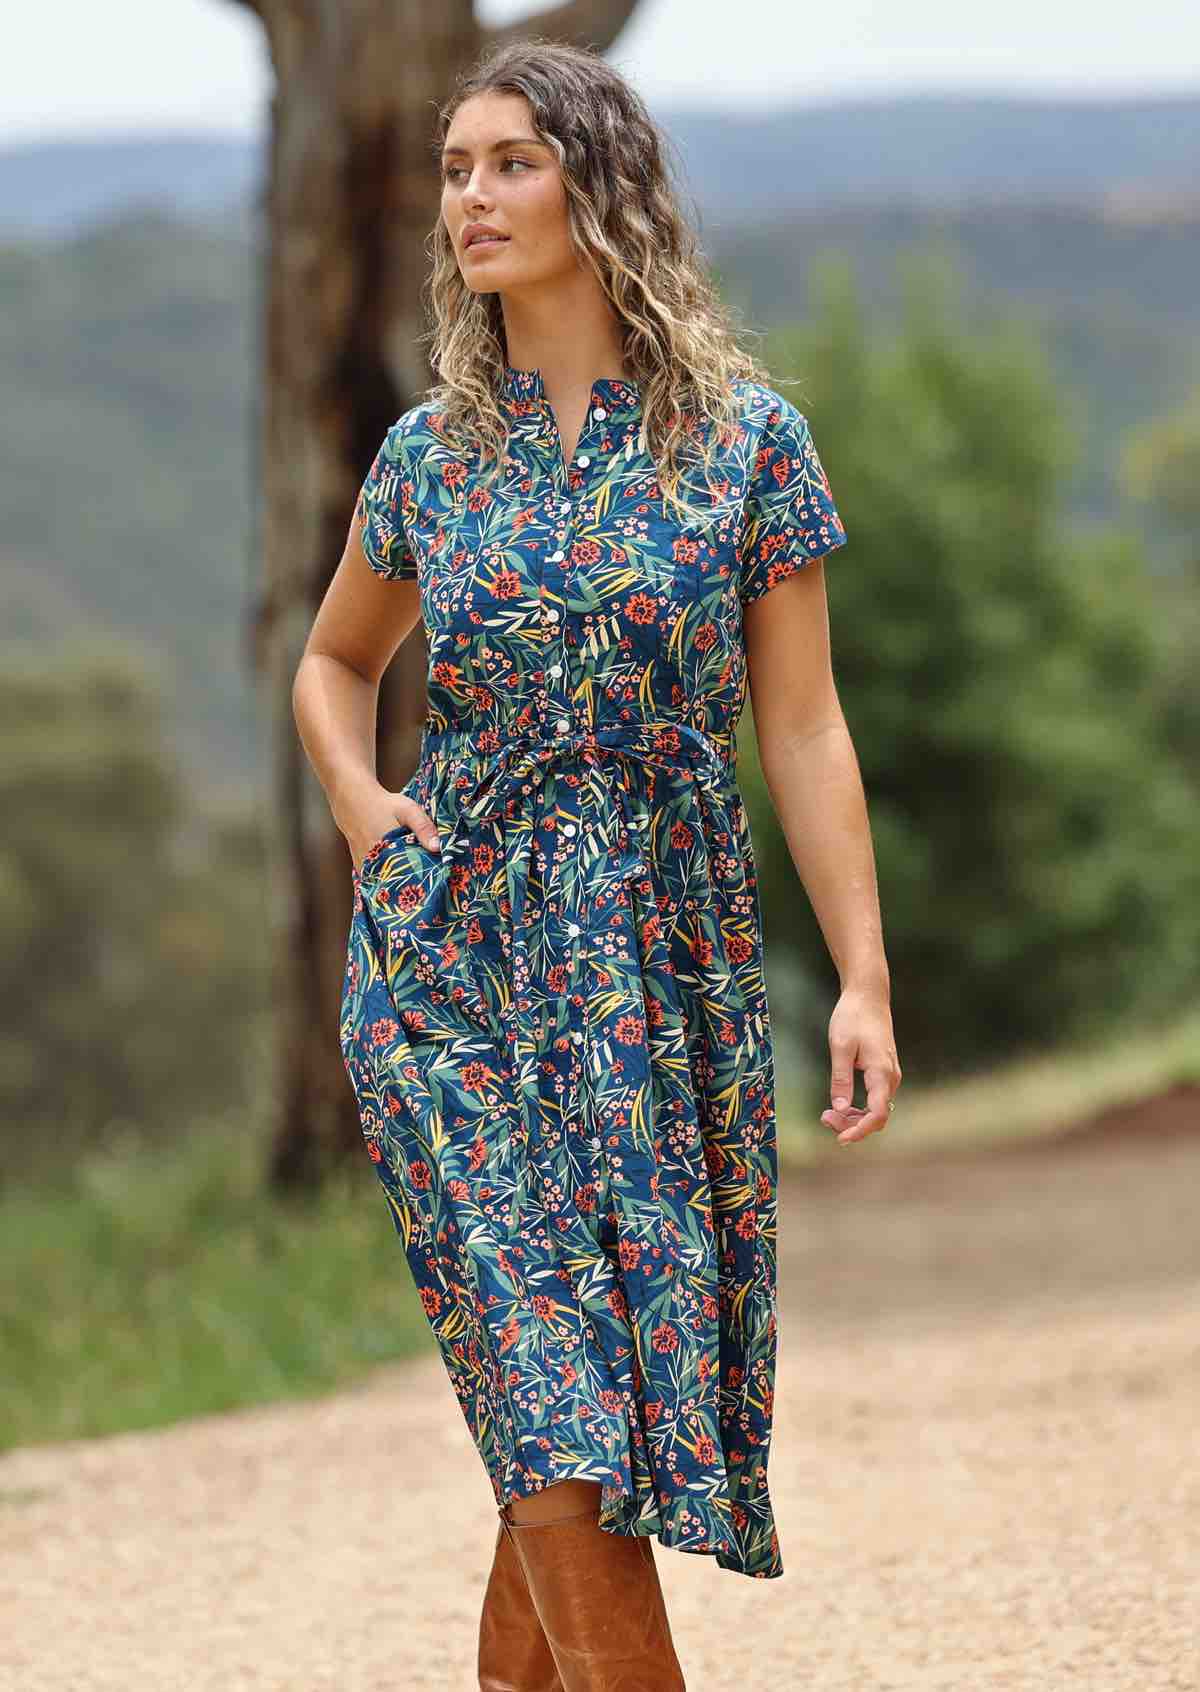 woman wearing floral button up retro style teal blue maxi dress trees and hills in background